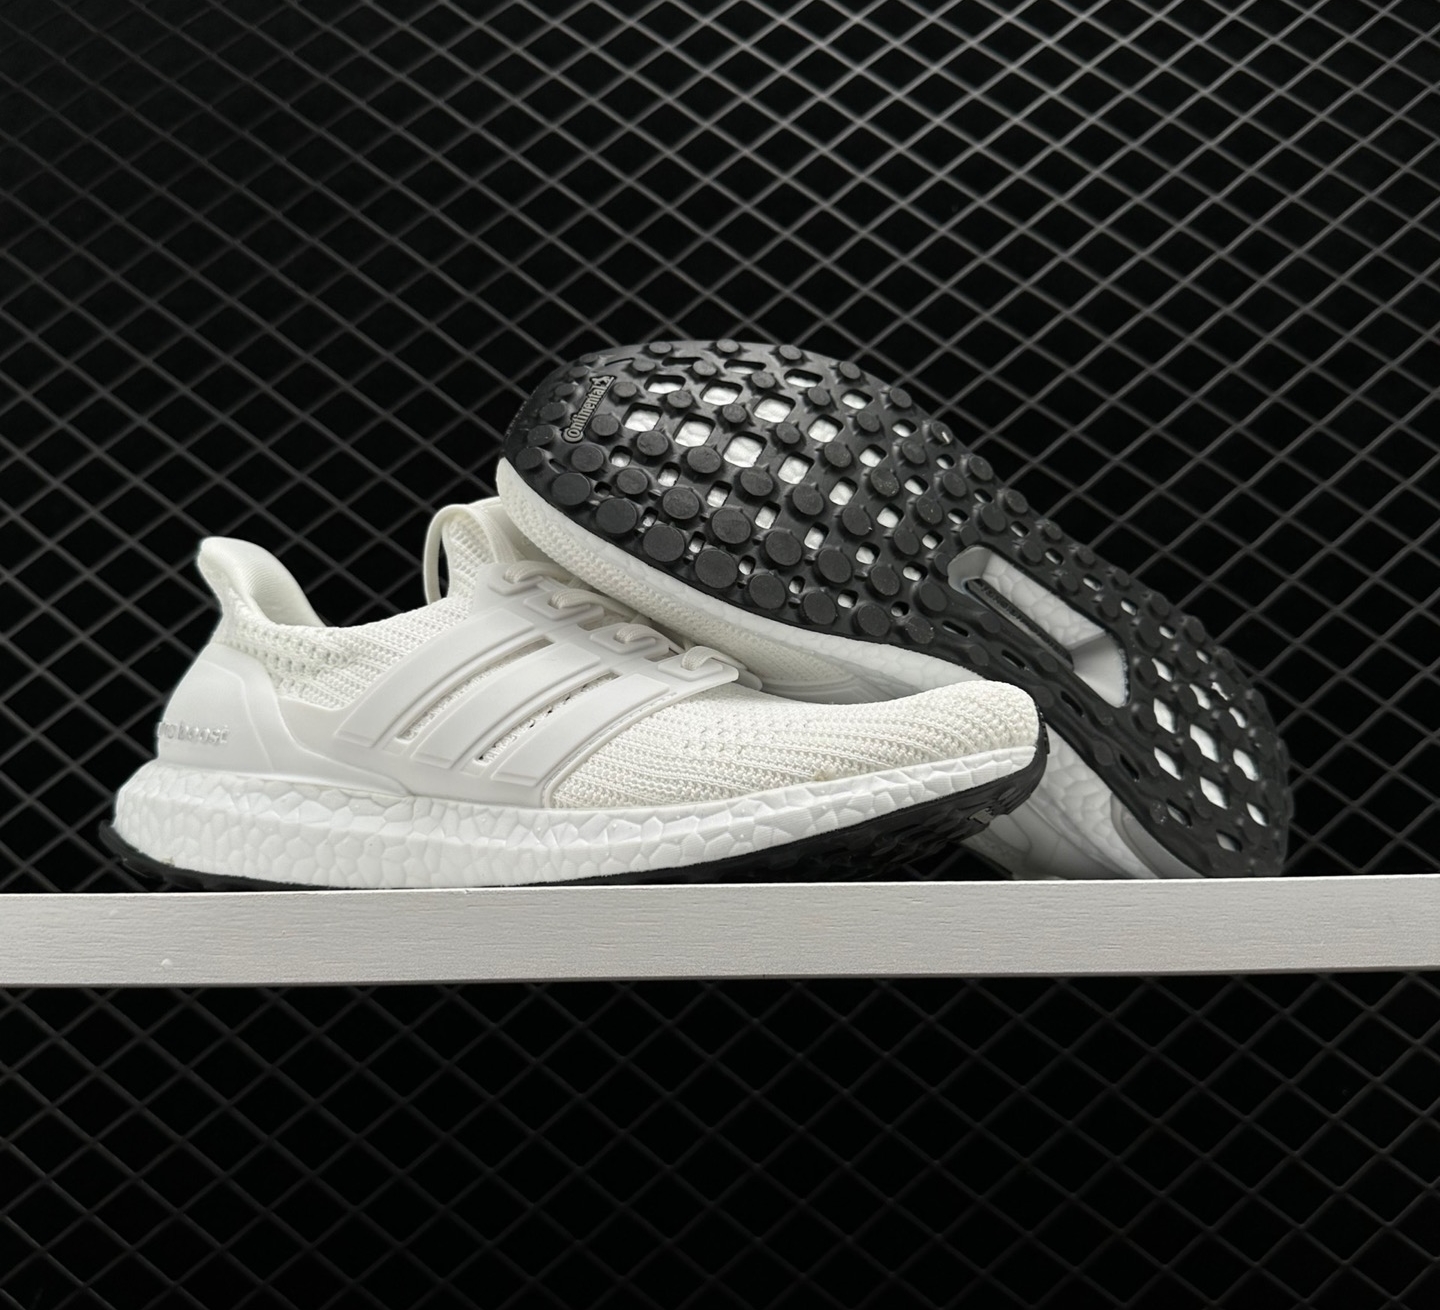 Adidas UltraBoost 4.0 DNA 'Cloud White' FY9120 - Latest Release and Sleek Style